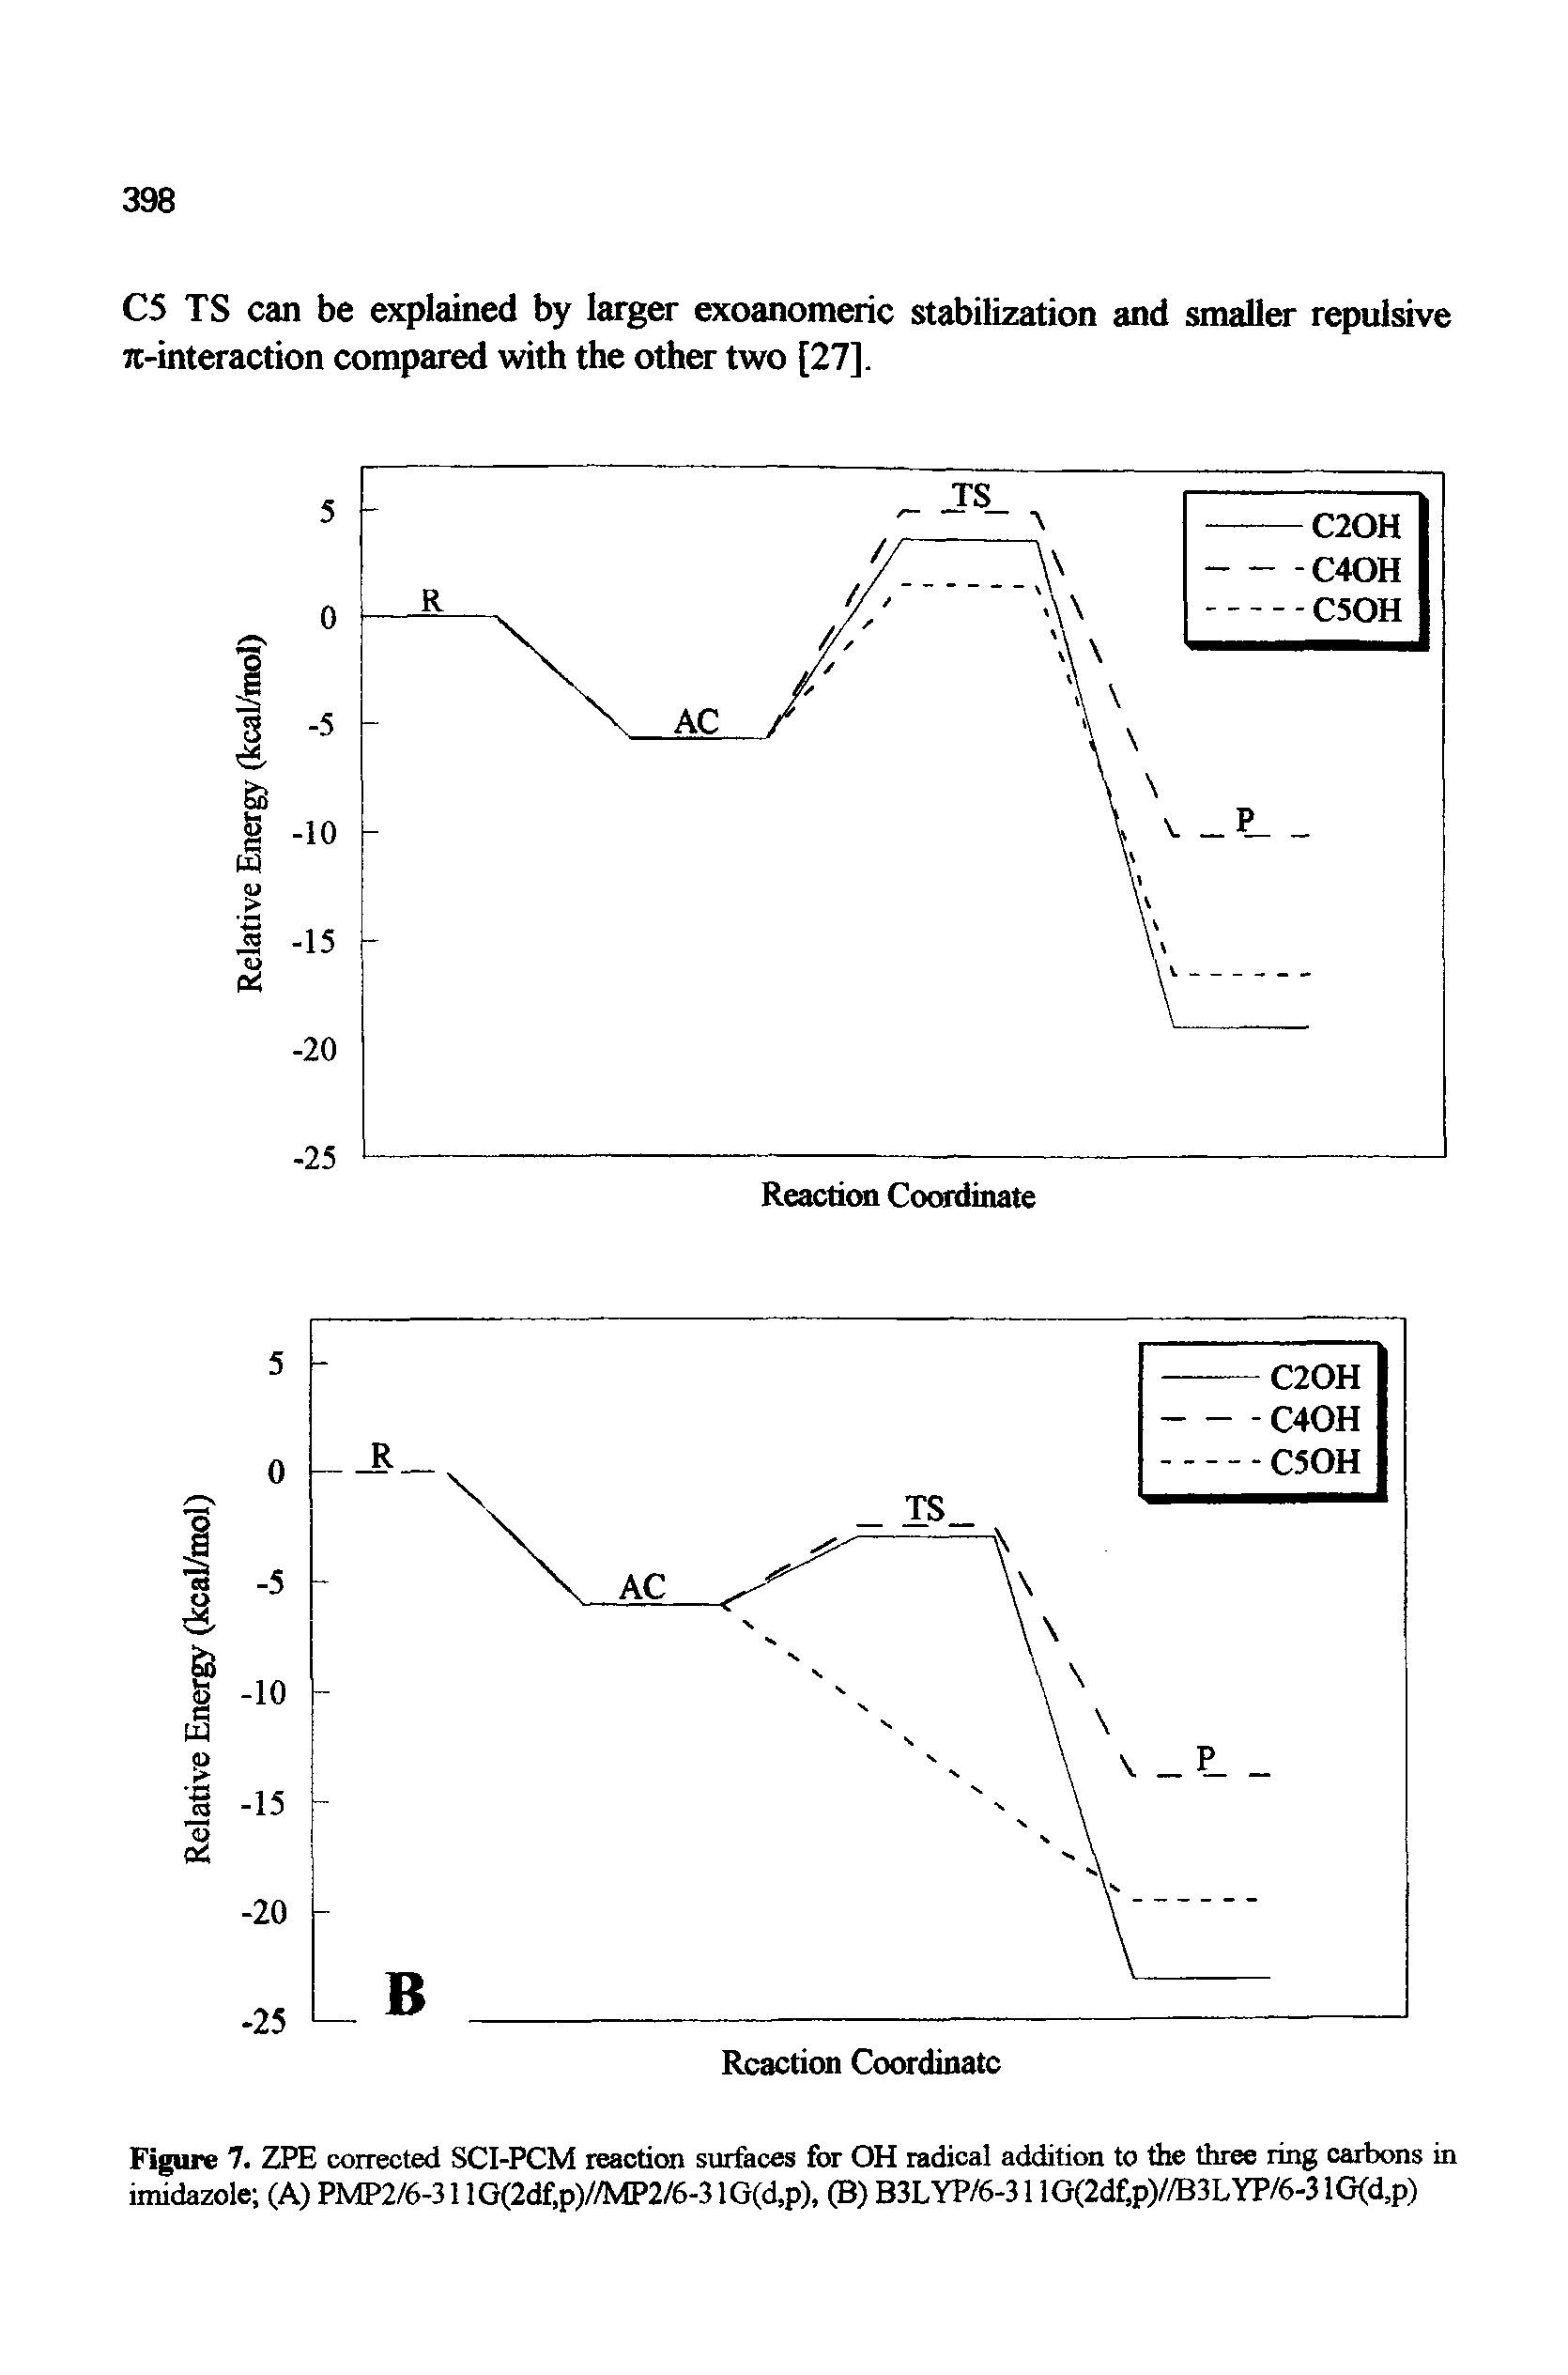 Figure 7. ZPE coirected SCI-PCM leactian surfaces for OH radical addition to the three ring carbons in imidazxjle (A) PMP2/6-3110(2df.p)//MP2/6-3 lG(d,p), (B) B3LYP/6-3110(2df.p)//B3LYP/6-3 lG(d,p)...